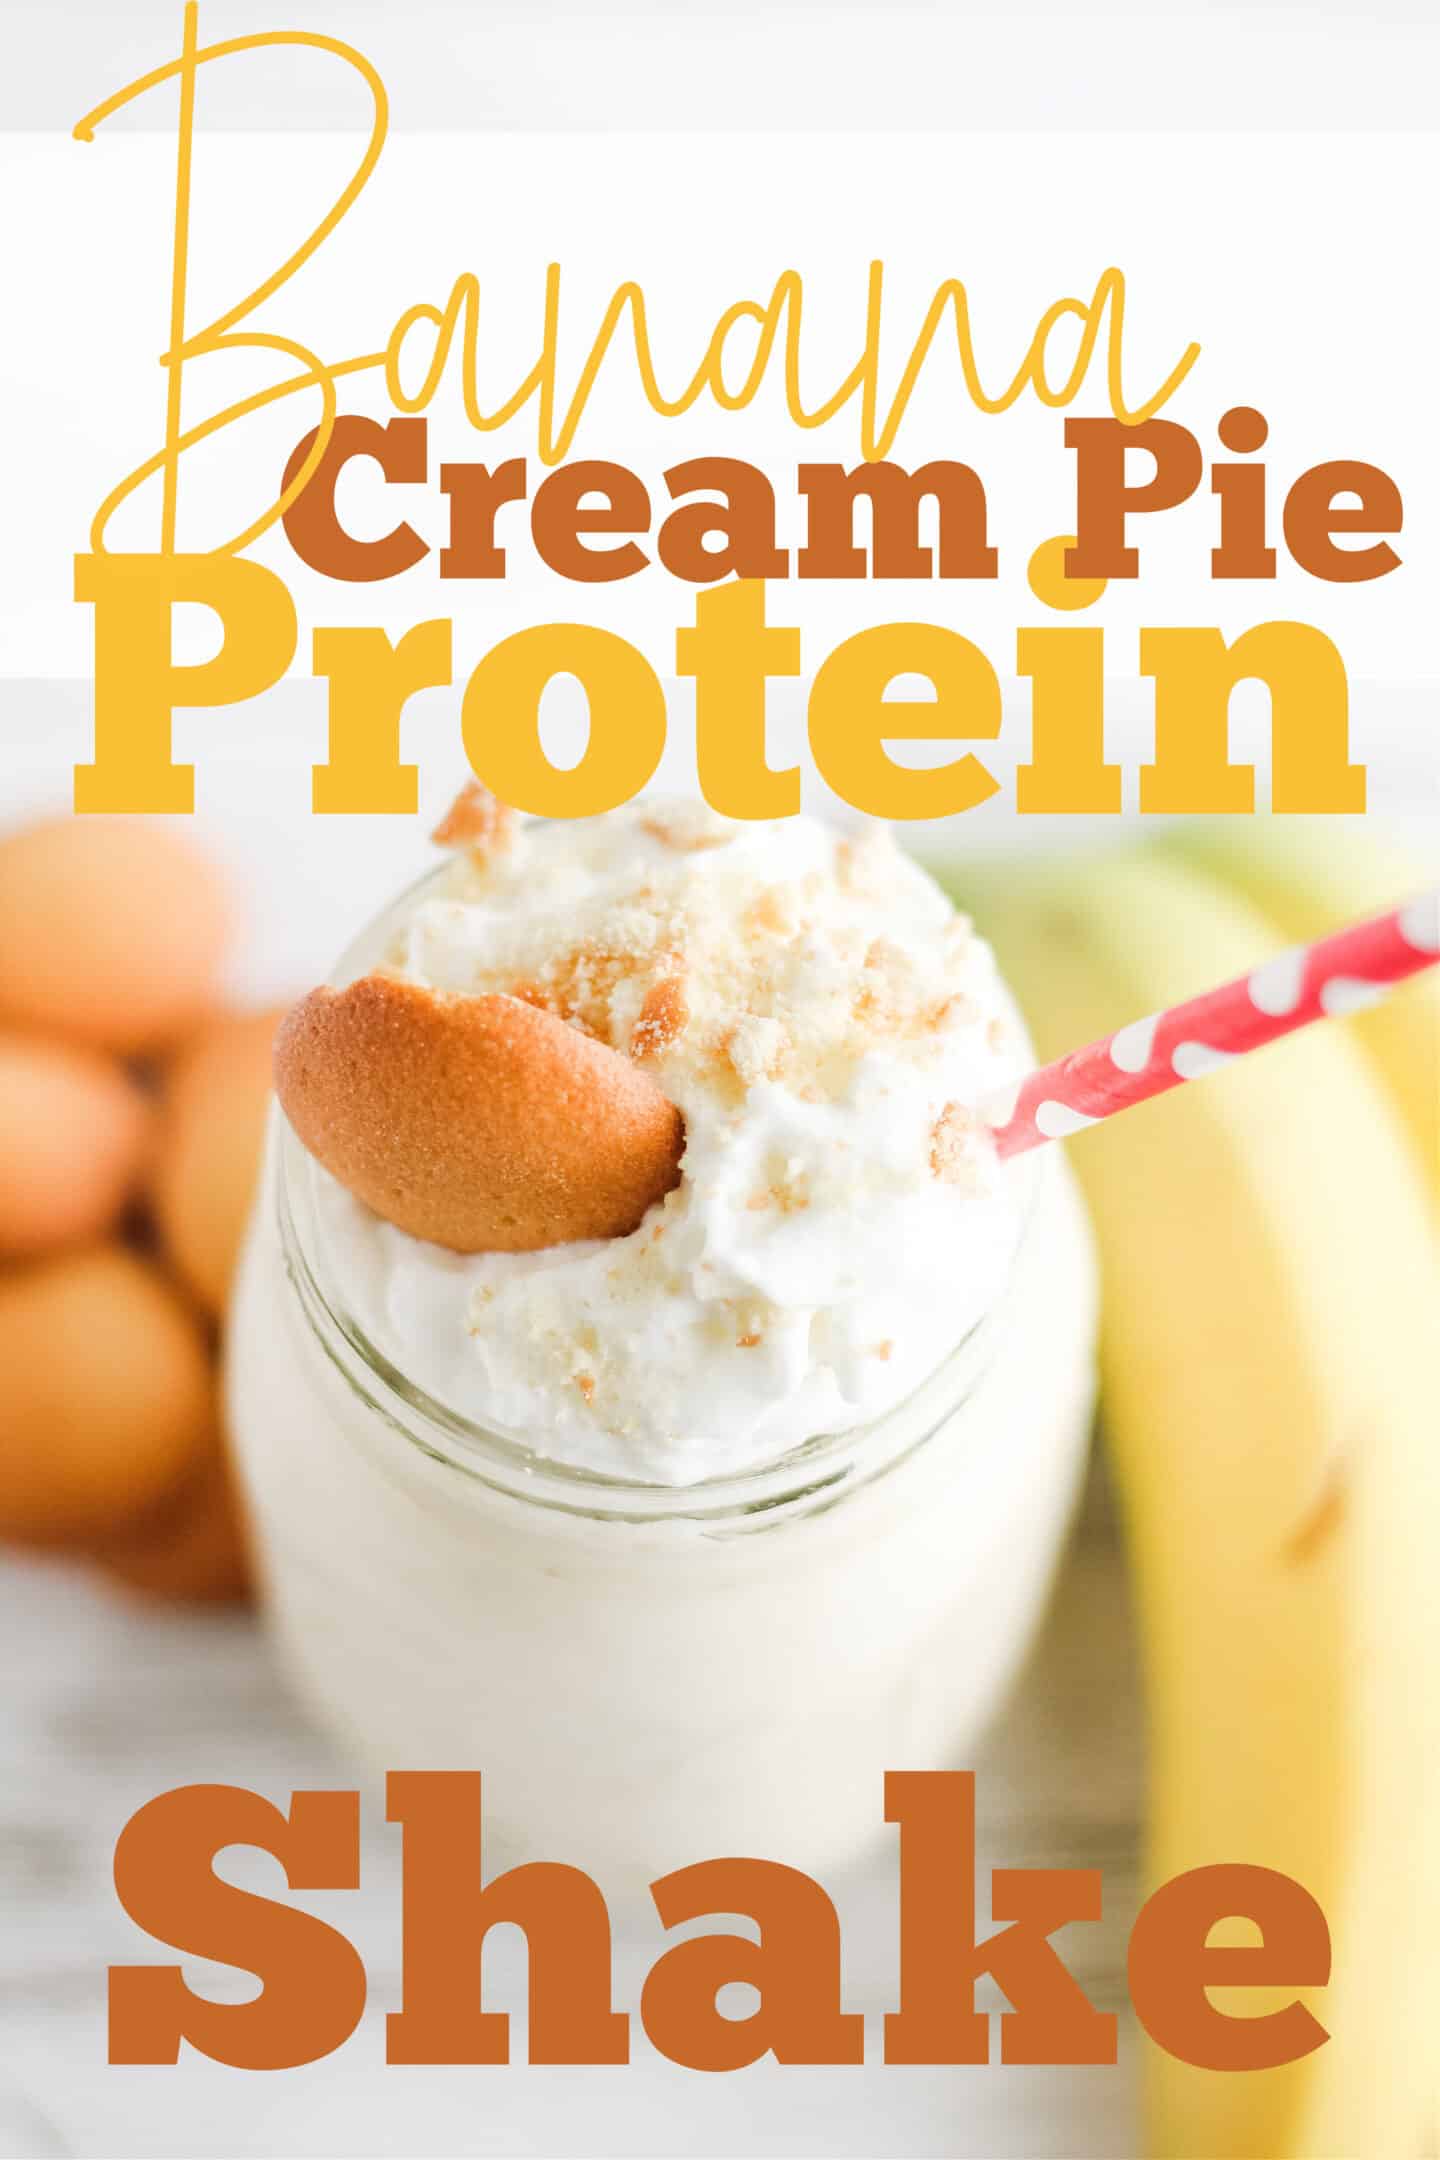 If you love banana pudding or banana cream pie, starting your day with this simple Banana Protein Shake is a must. Not only does it give a great boost to your morning but it feels like you're actually having dessert for breakfast! You can easily drink this for breakfast, lunch, dinner, or dessert!  